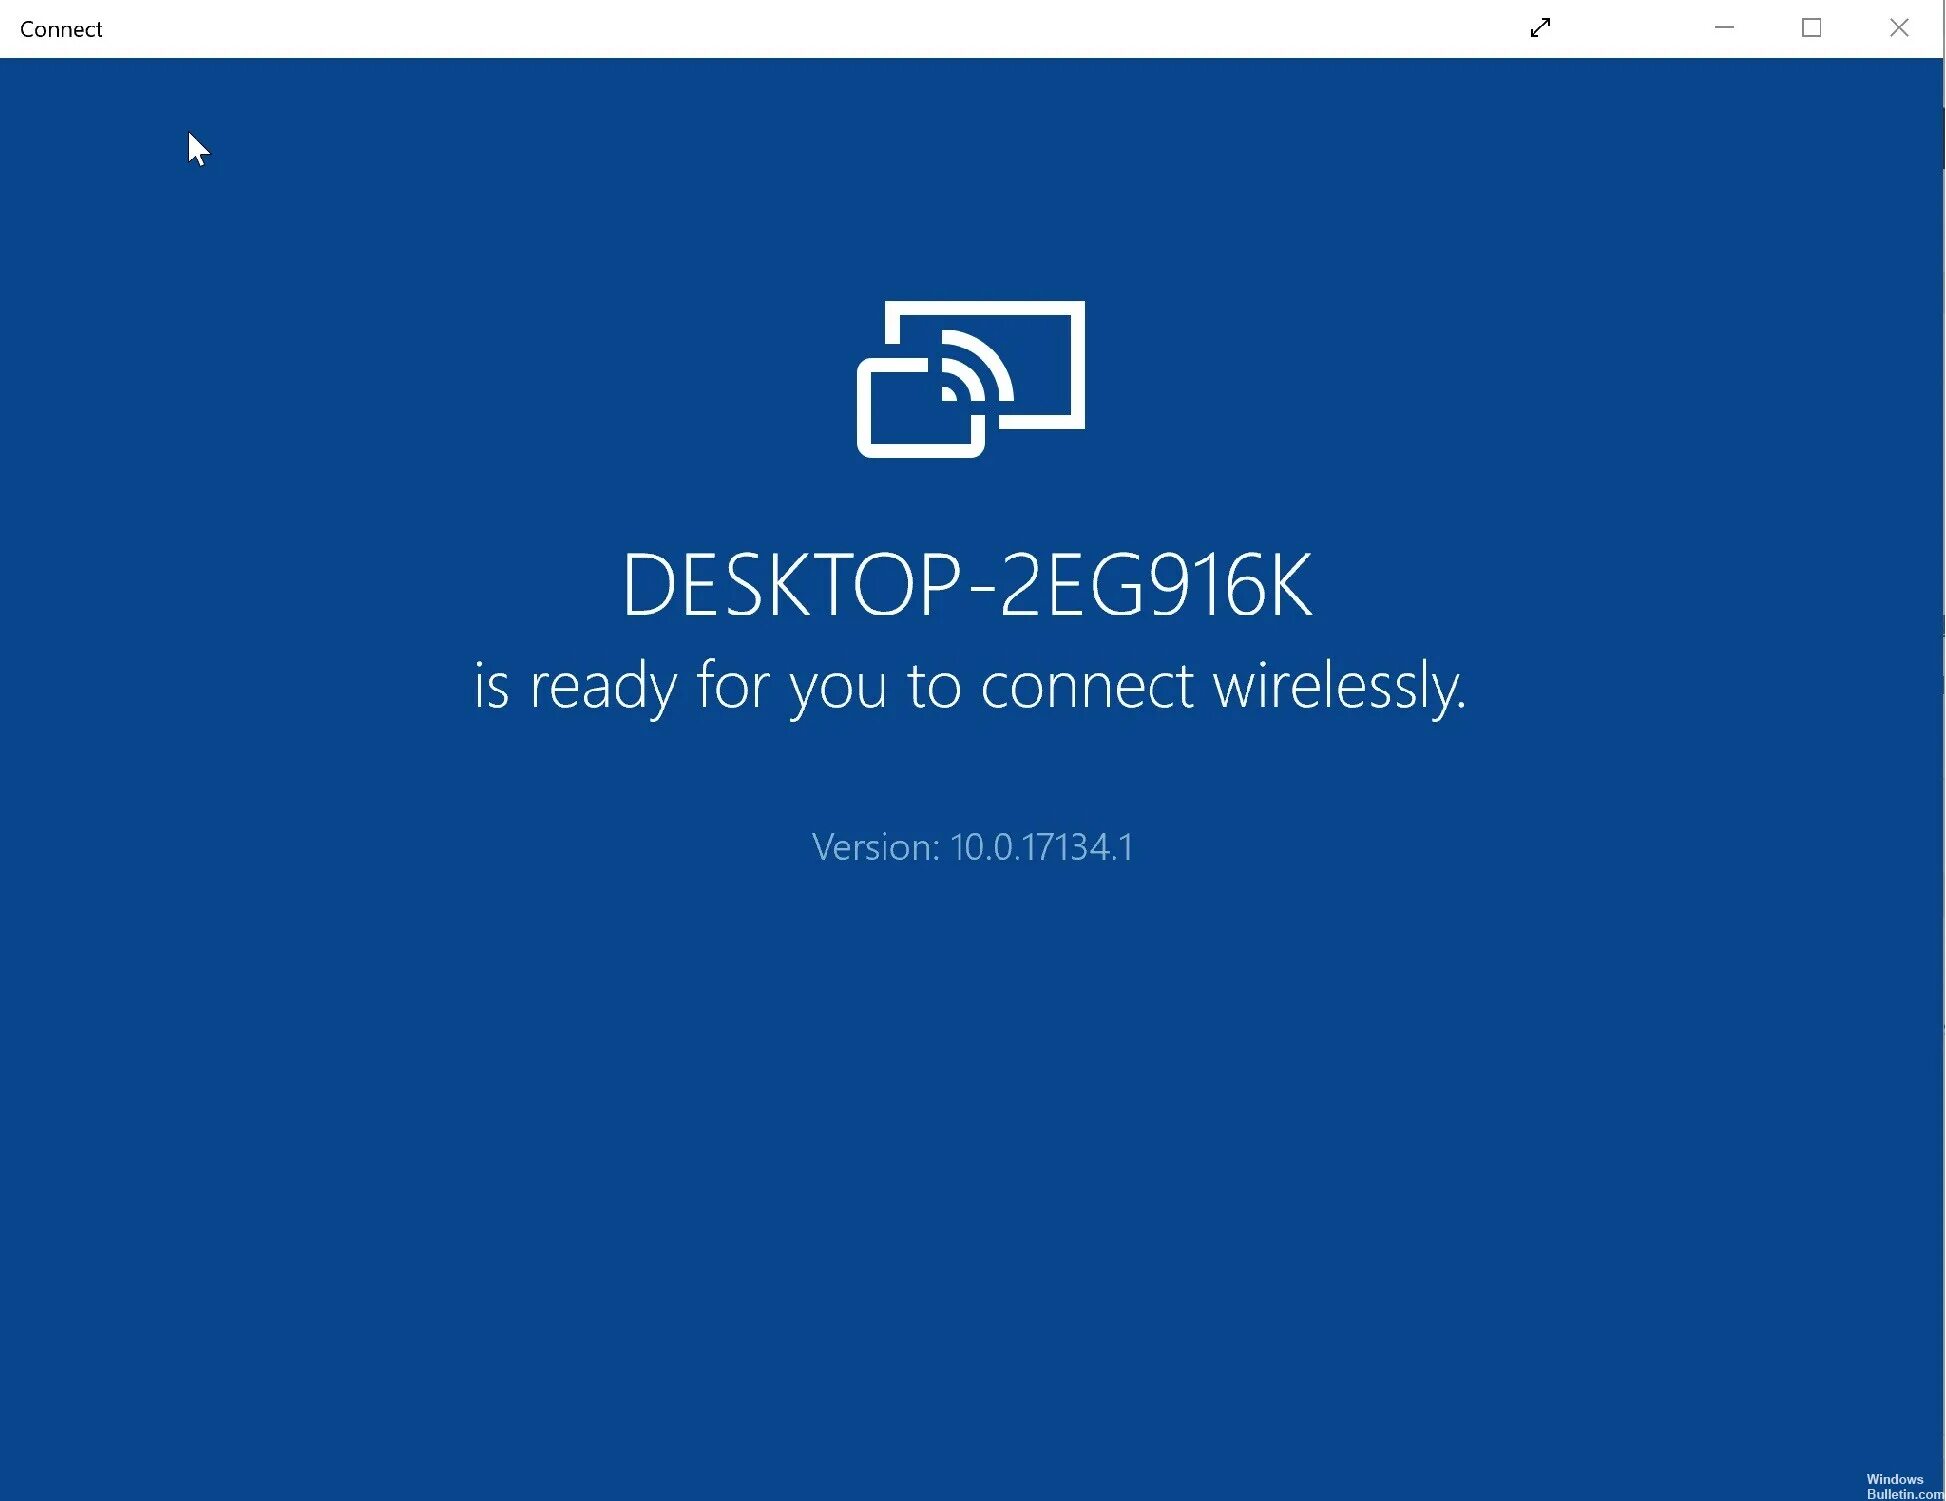 Microsoft connect. BSOD Windows 10. Microsoft connect apps (Miracast).